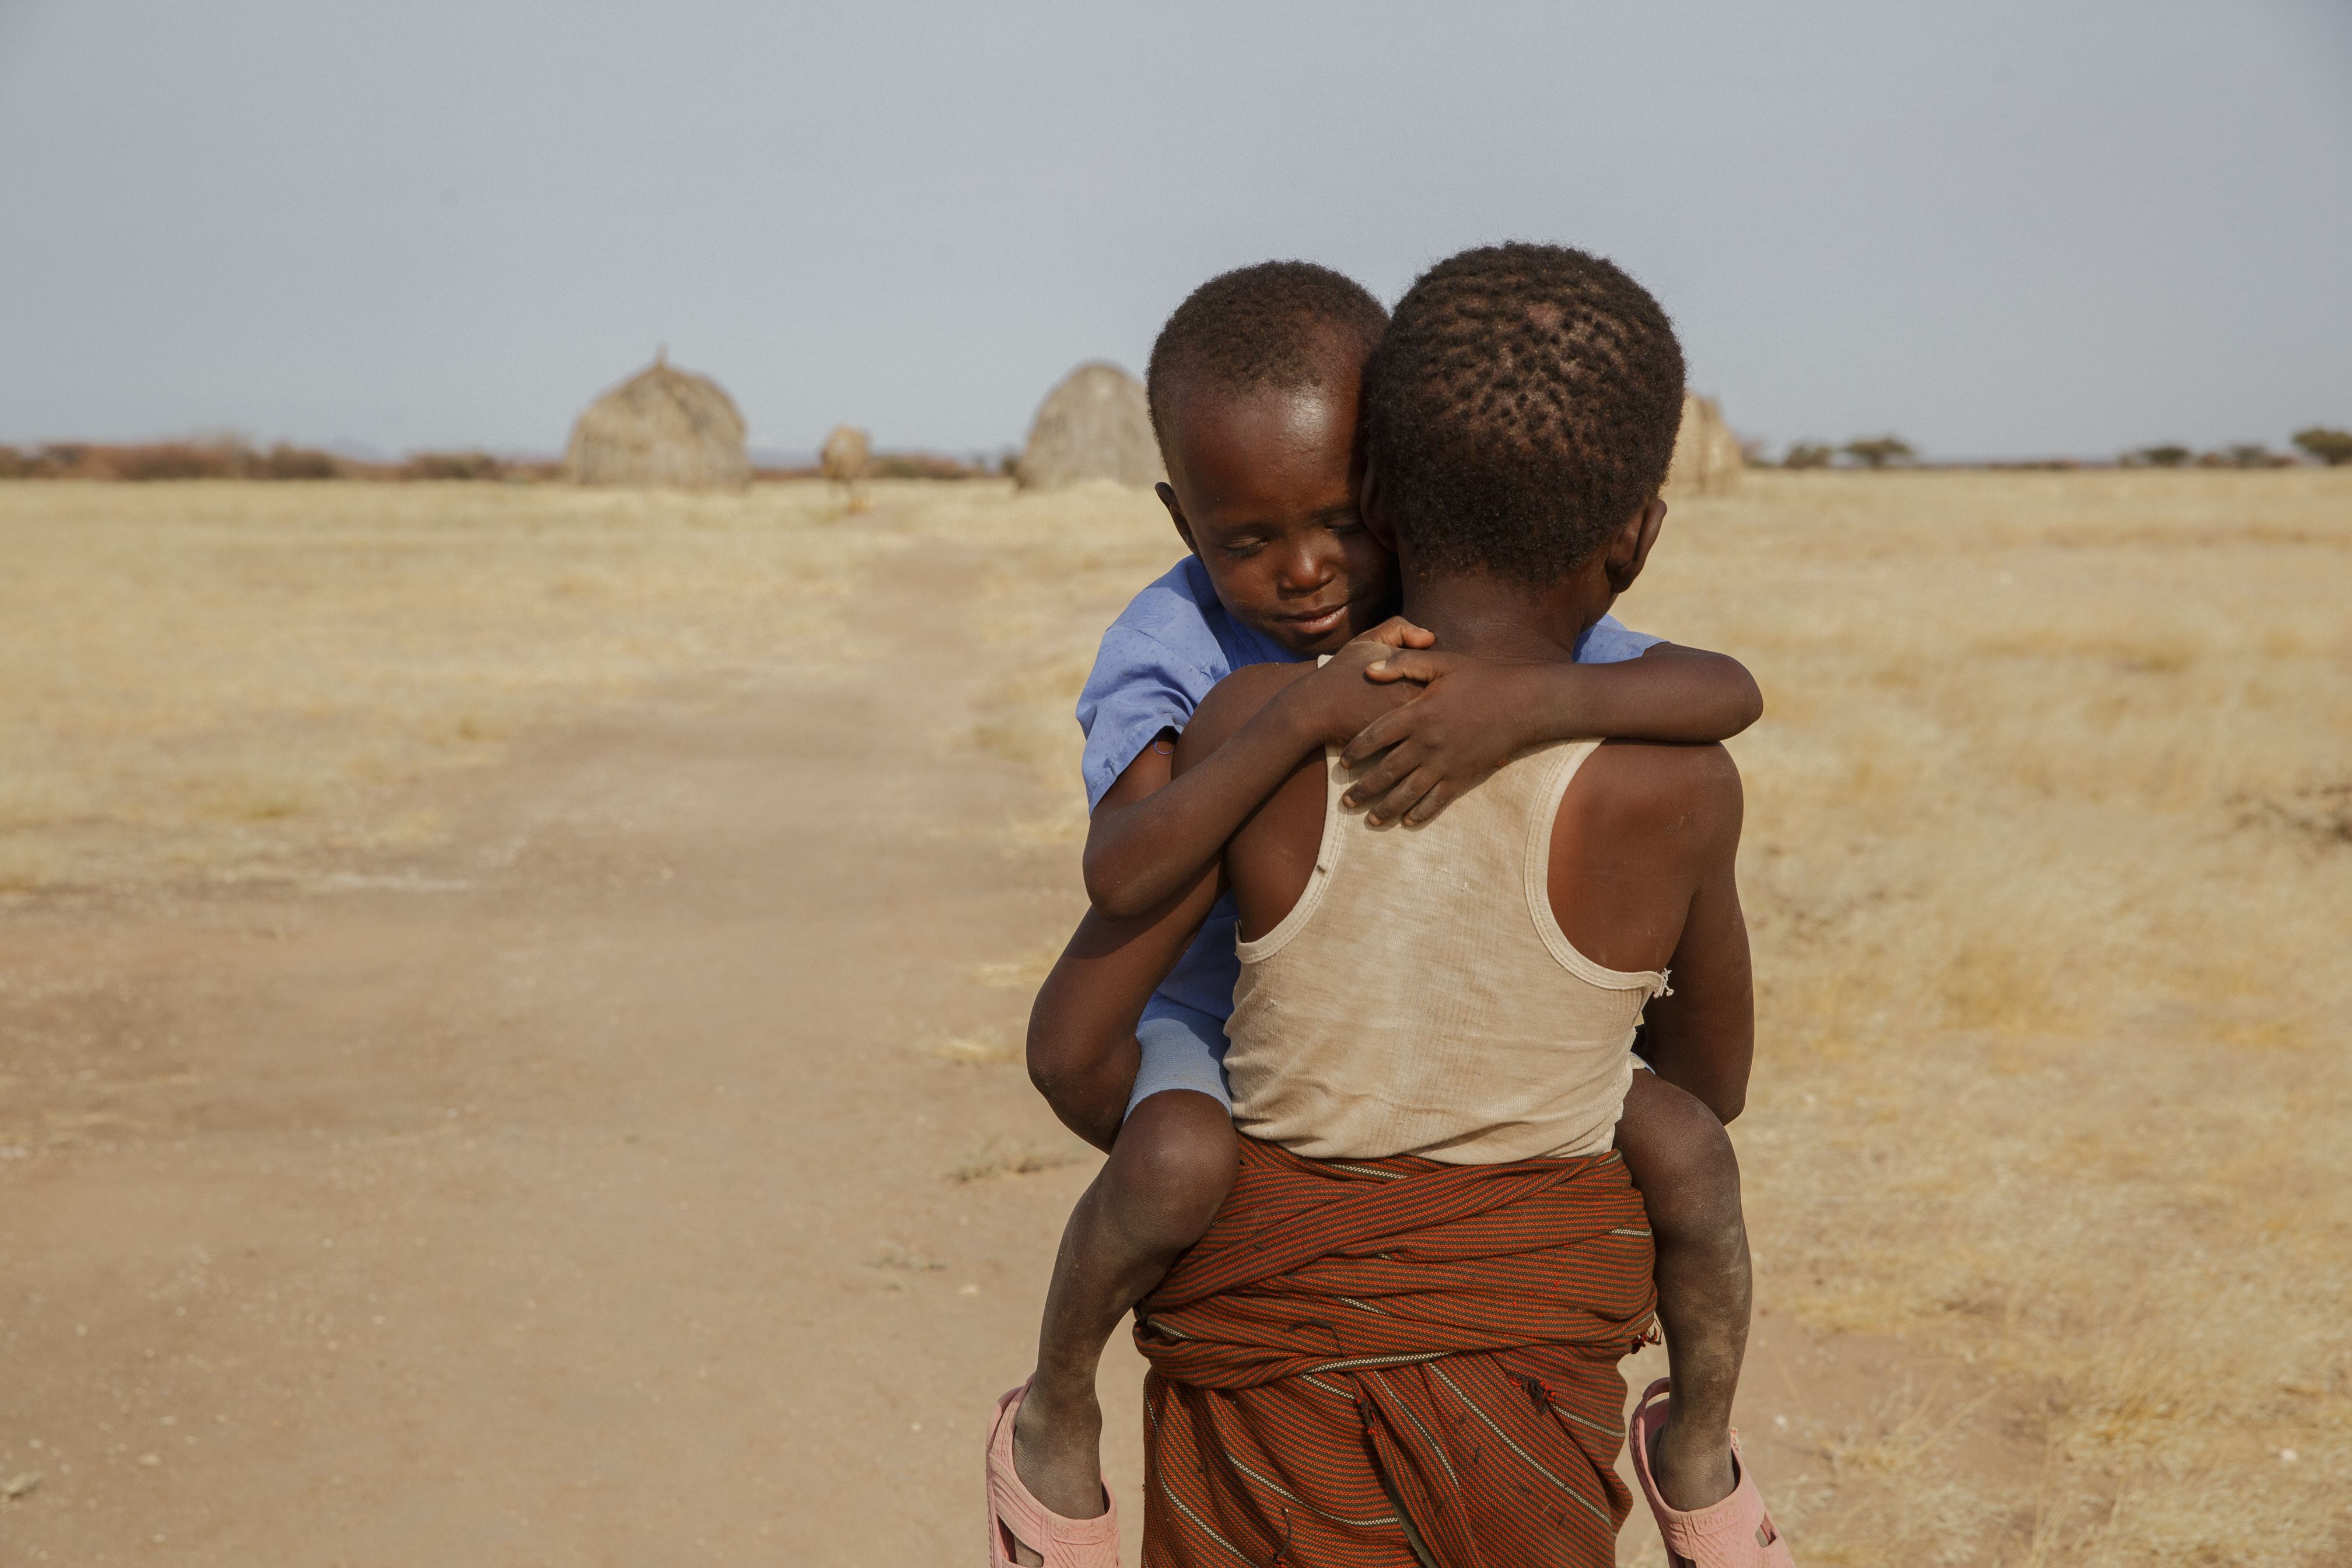 Two young boys walking in drought affected area - global hunger crisis